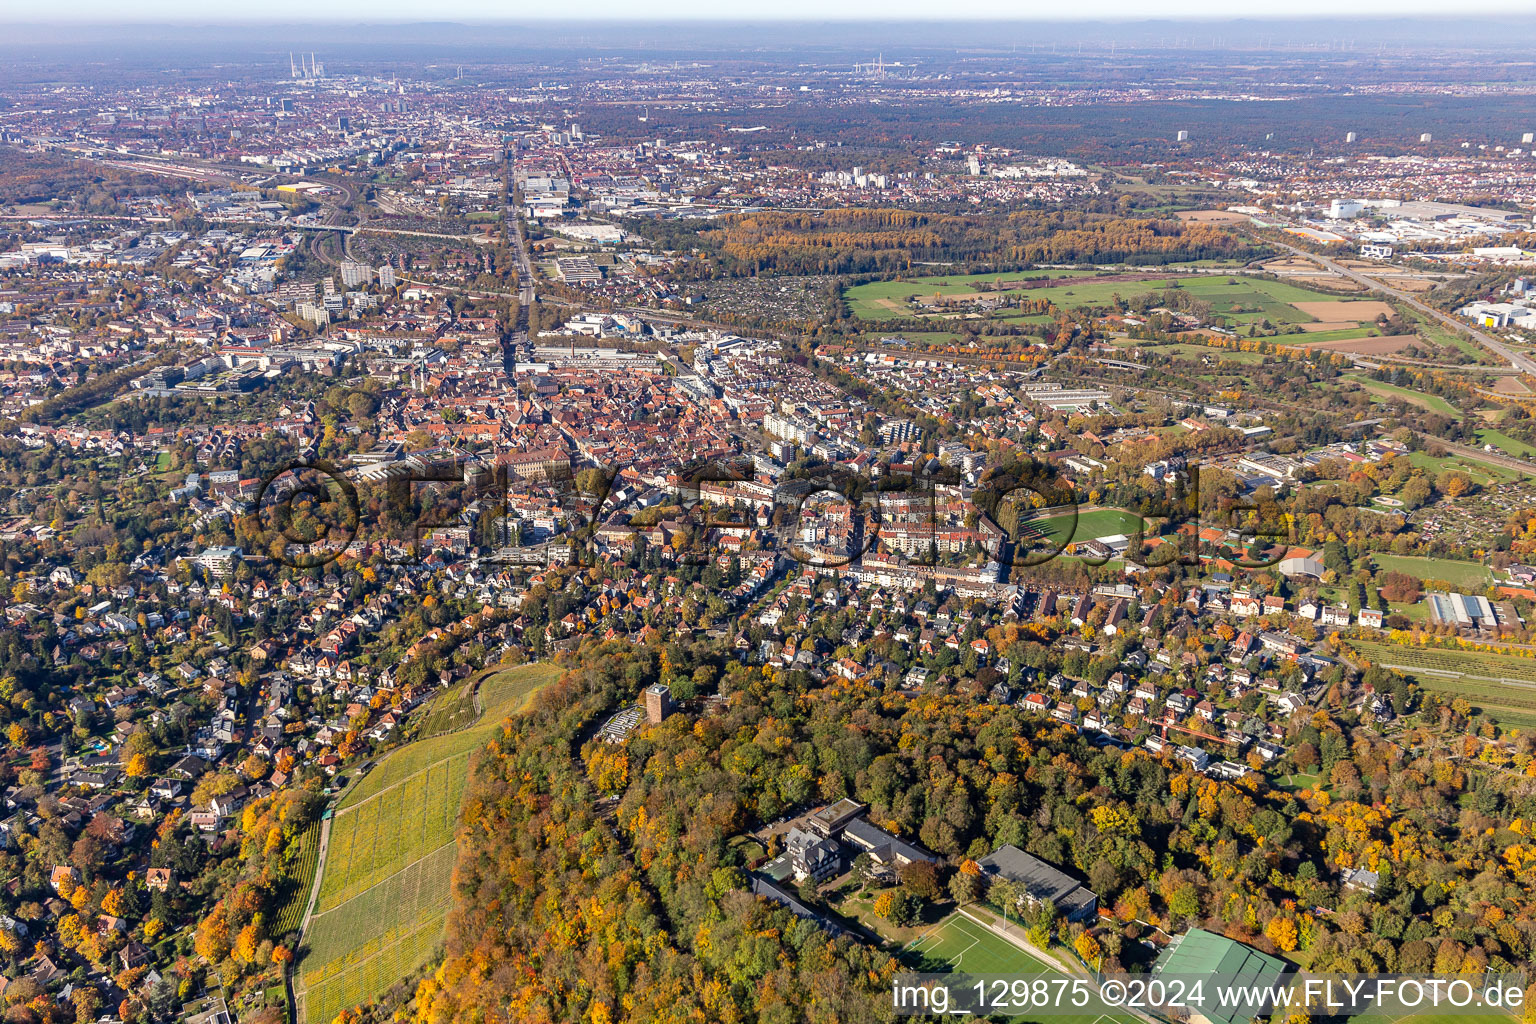 Aerial photograpy of District Durlach in Karlsruhe in the state Baden-Wuerttemberg, Germany